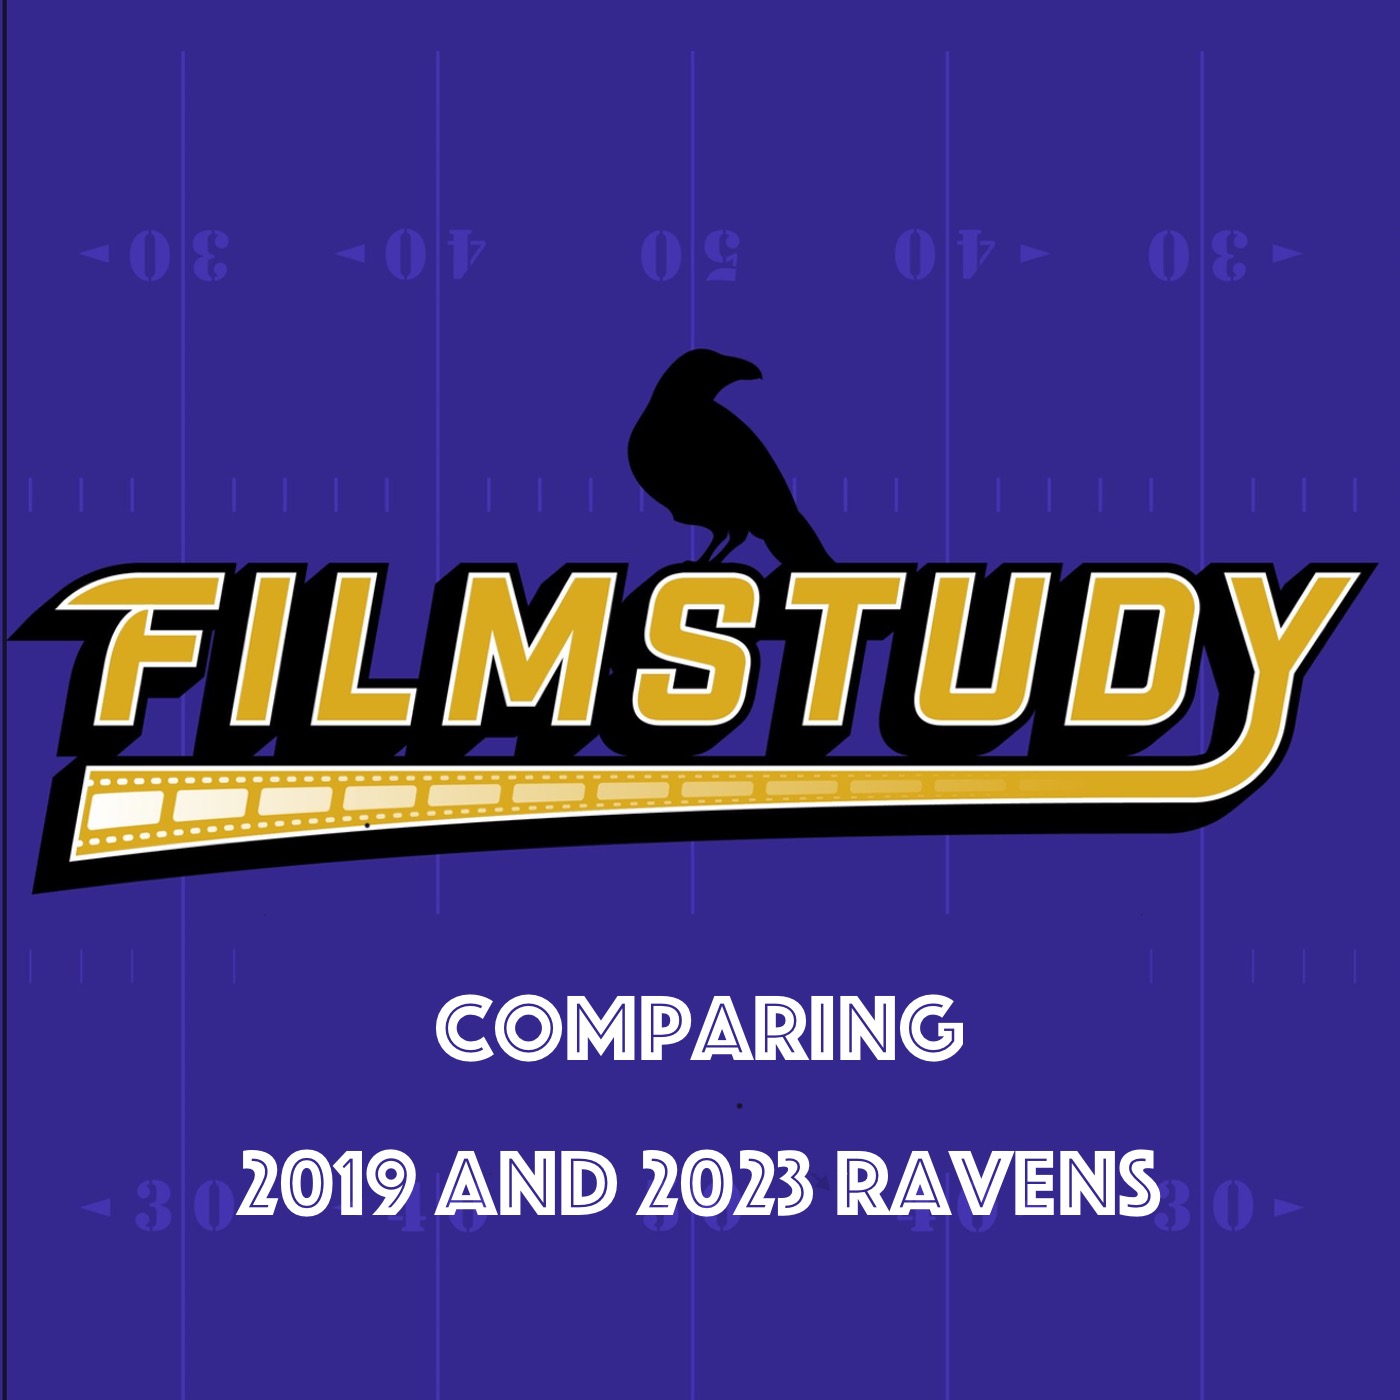 Comparing 2019 and 2023 Ravens